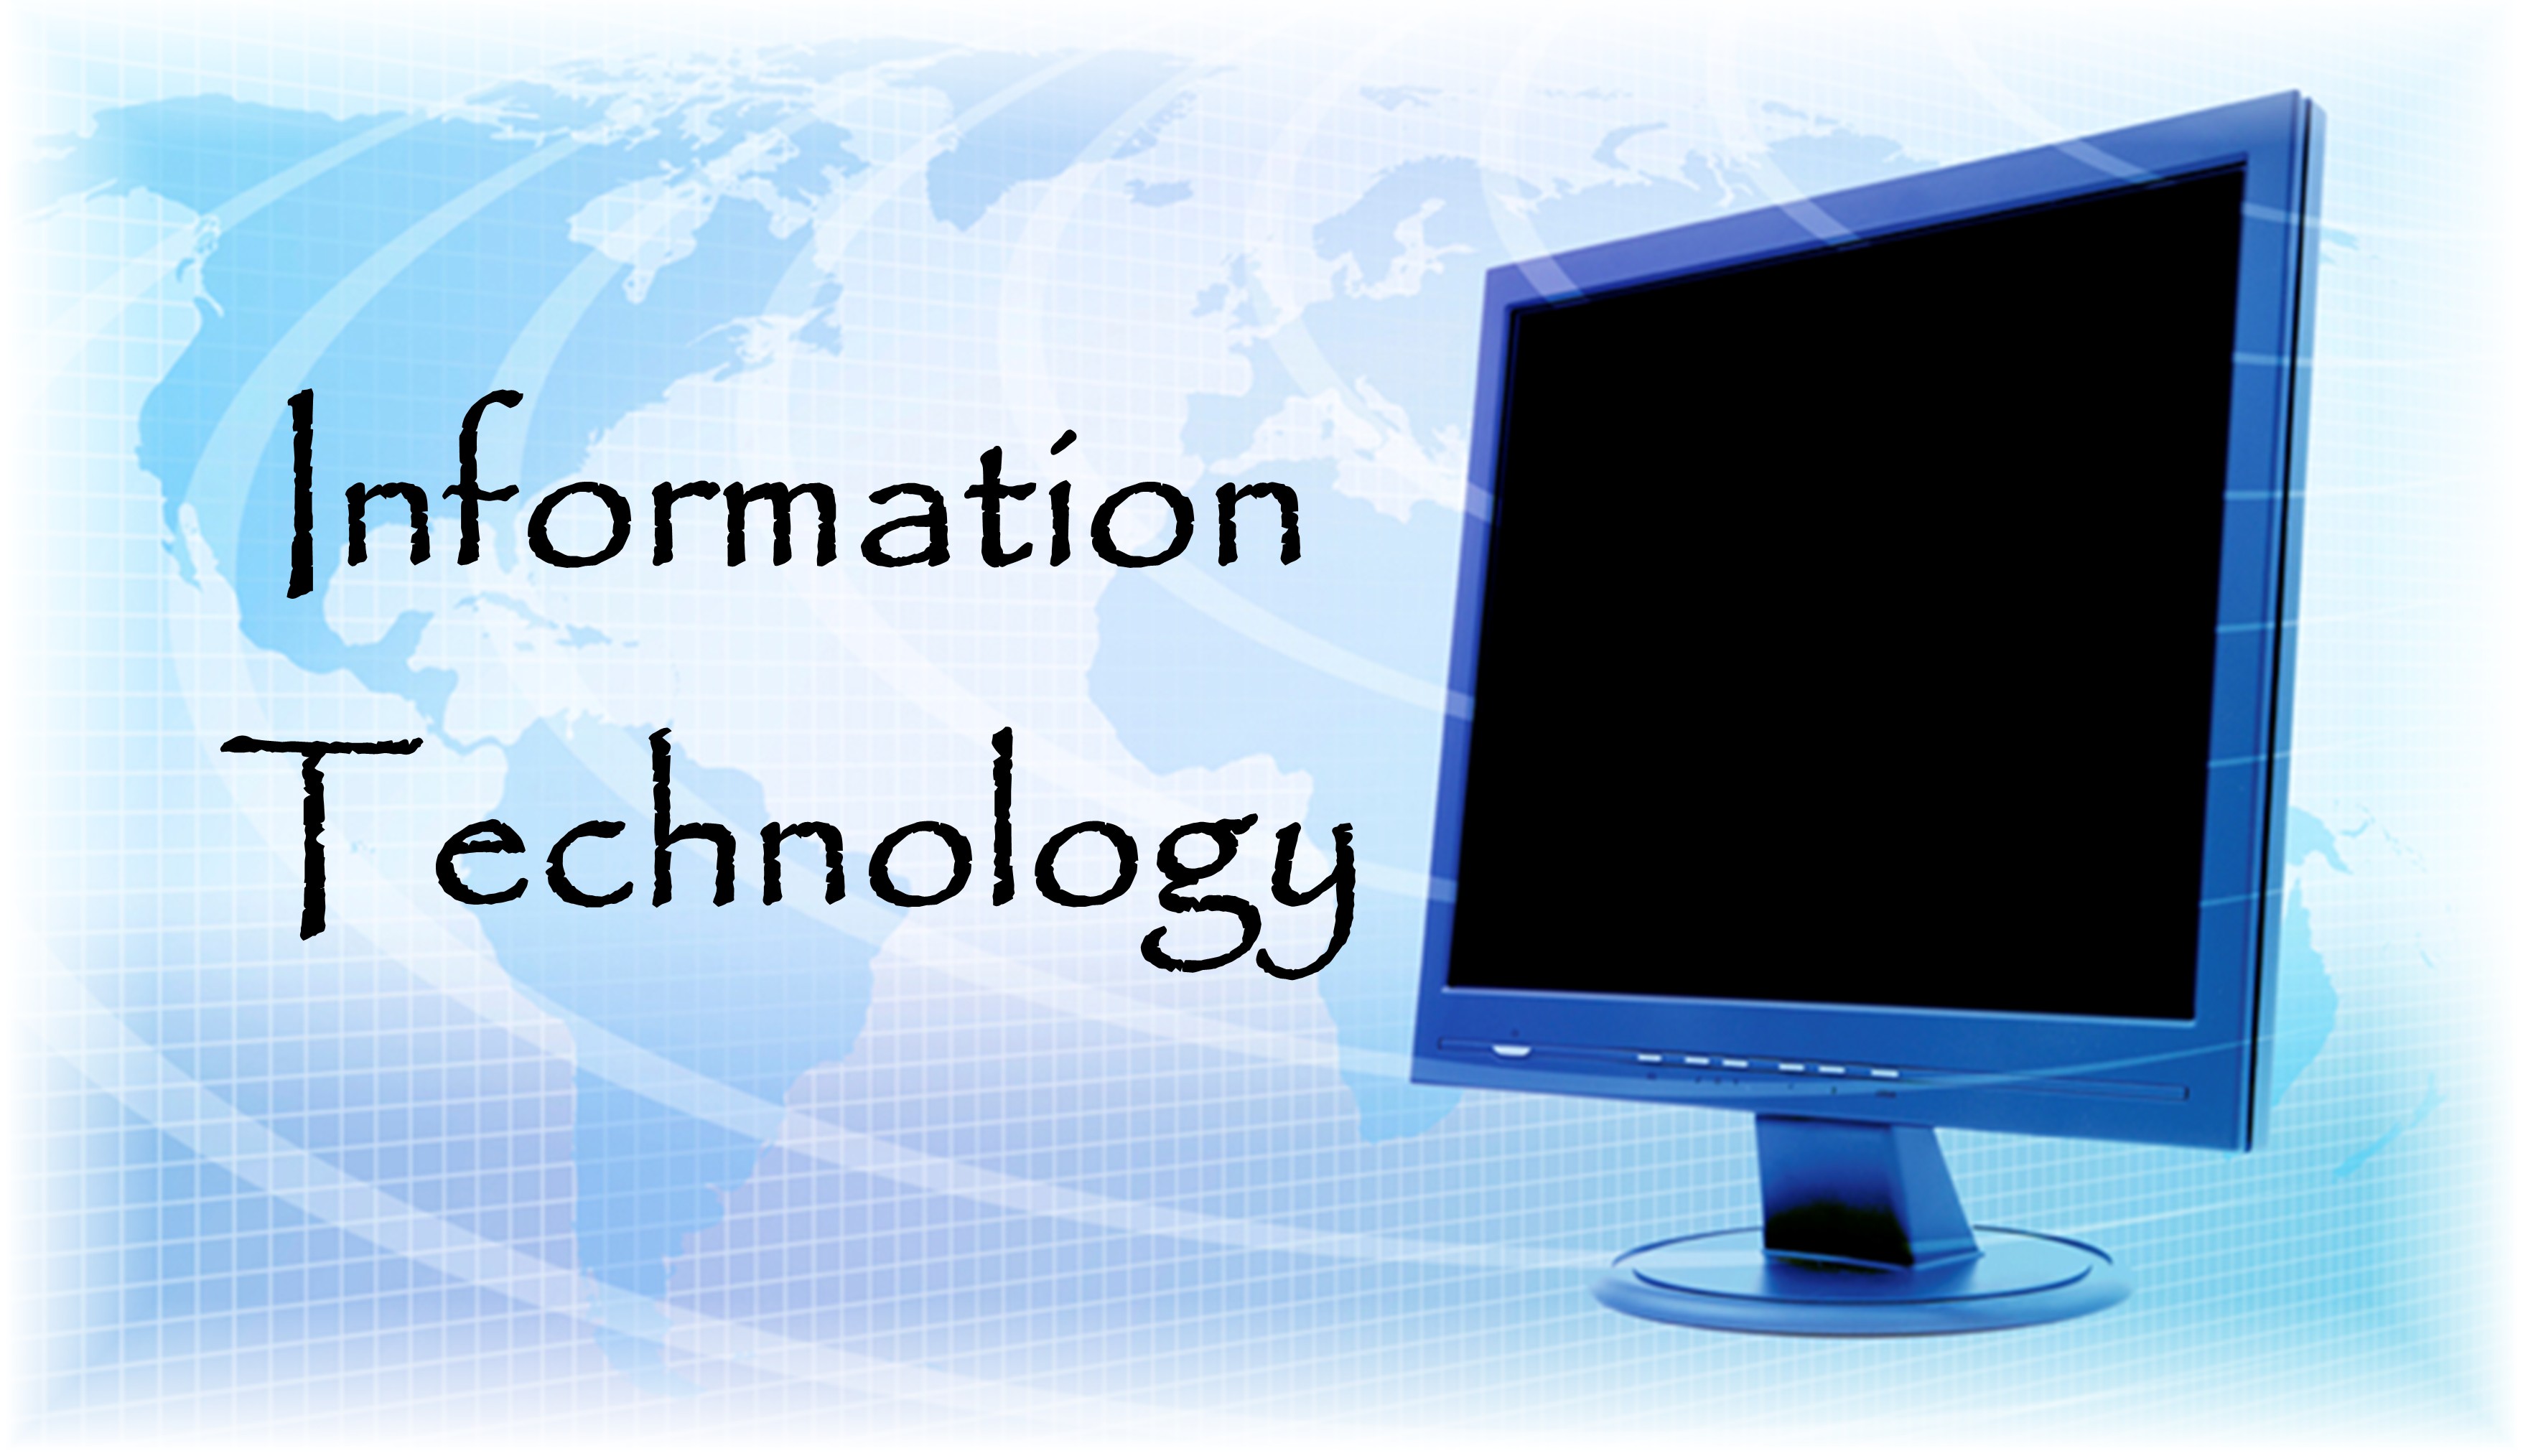 Dissertation topics in information technology management